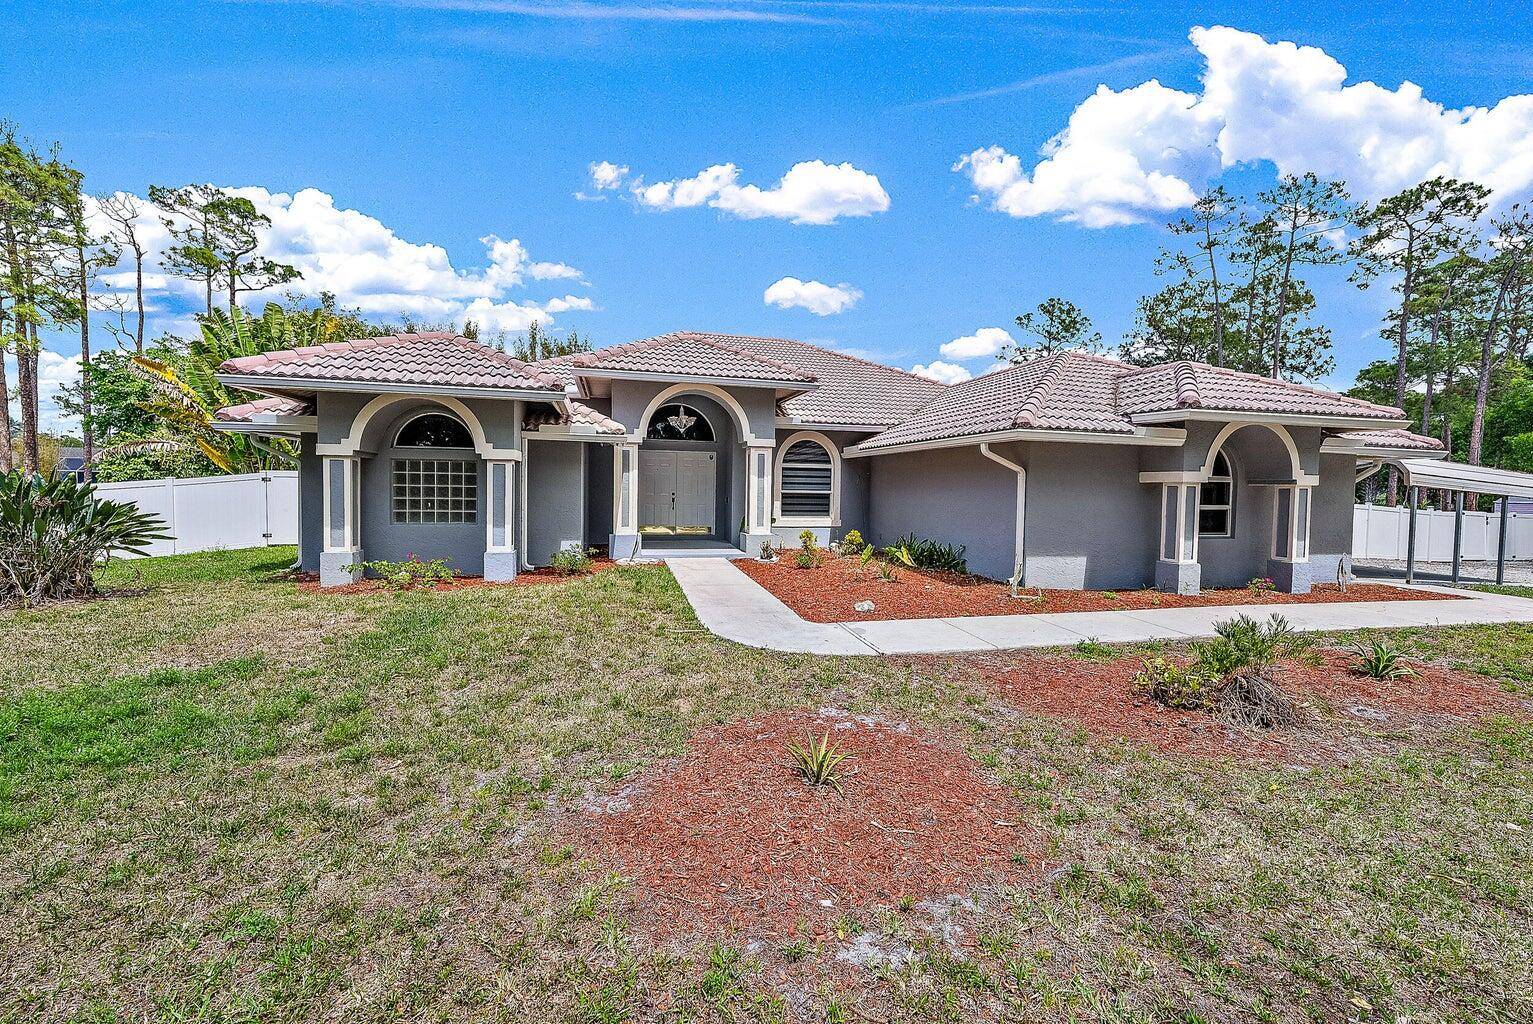 EXTREME PRIVACY AMAZING 3 BEDROOM 2 BATH 2 CAR GARAGE WITH TILE ROOF PLUS SCREENED POOL WITH EXTRA PRIVACY FENCE IN LOXAHATCHEE 1.